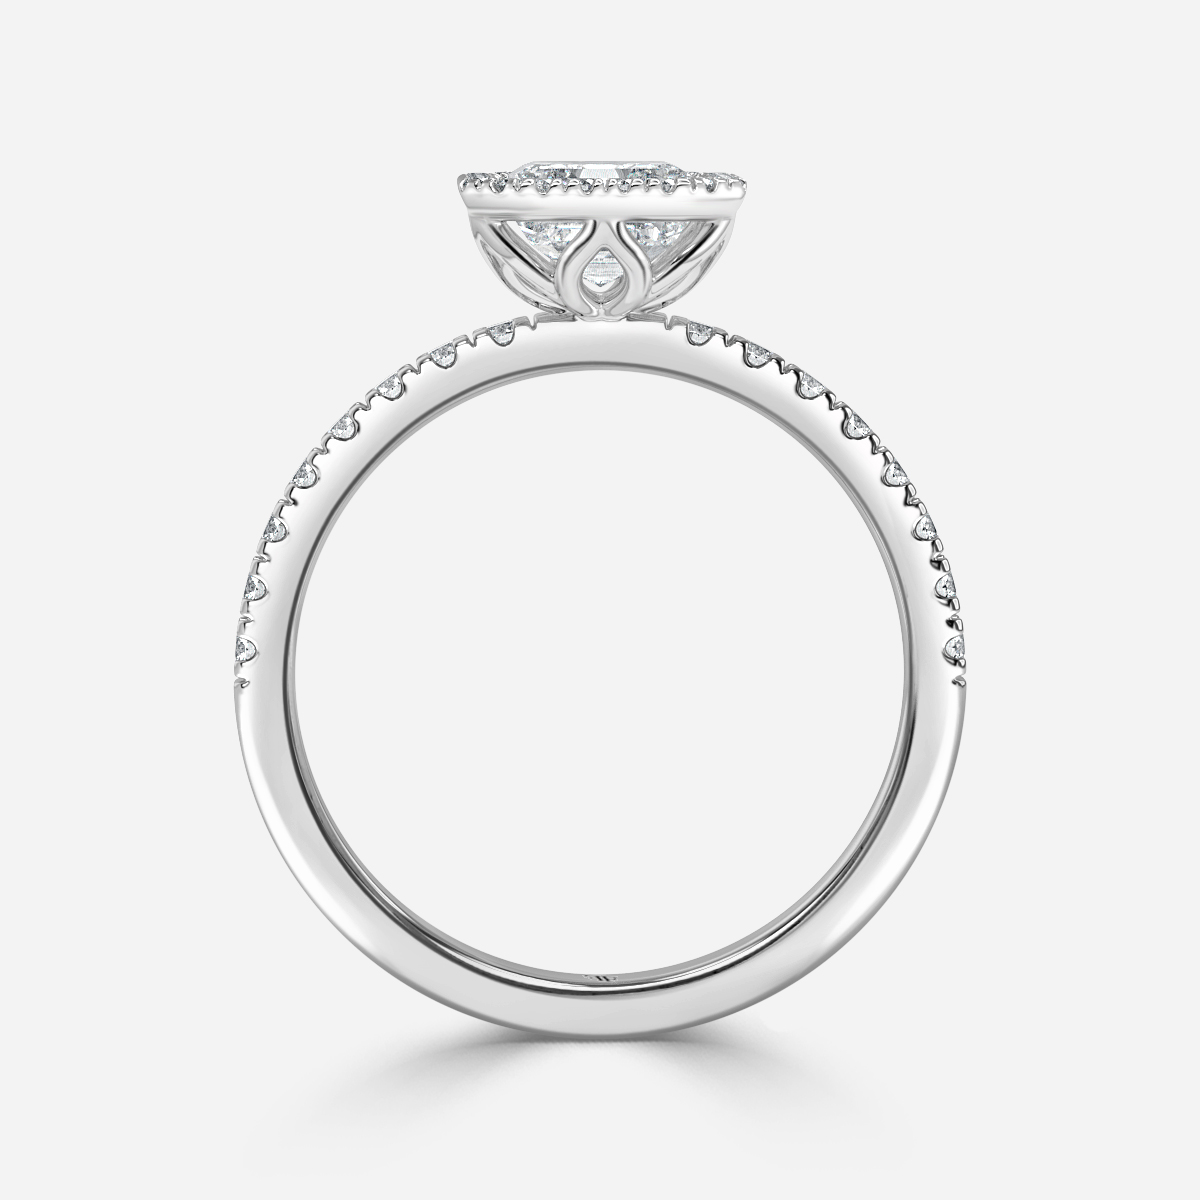 Lóis White Gold Halo Engagement Ring